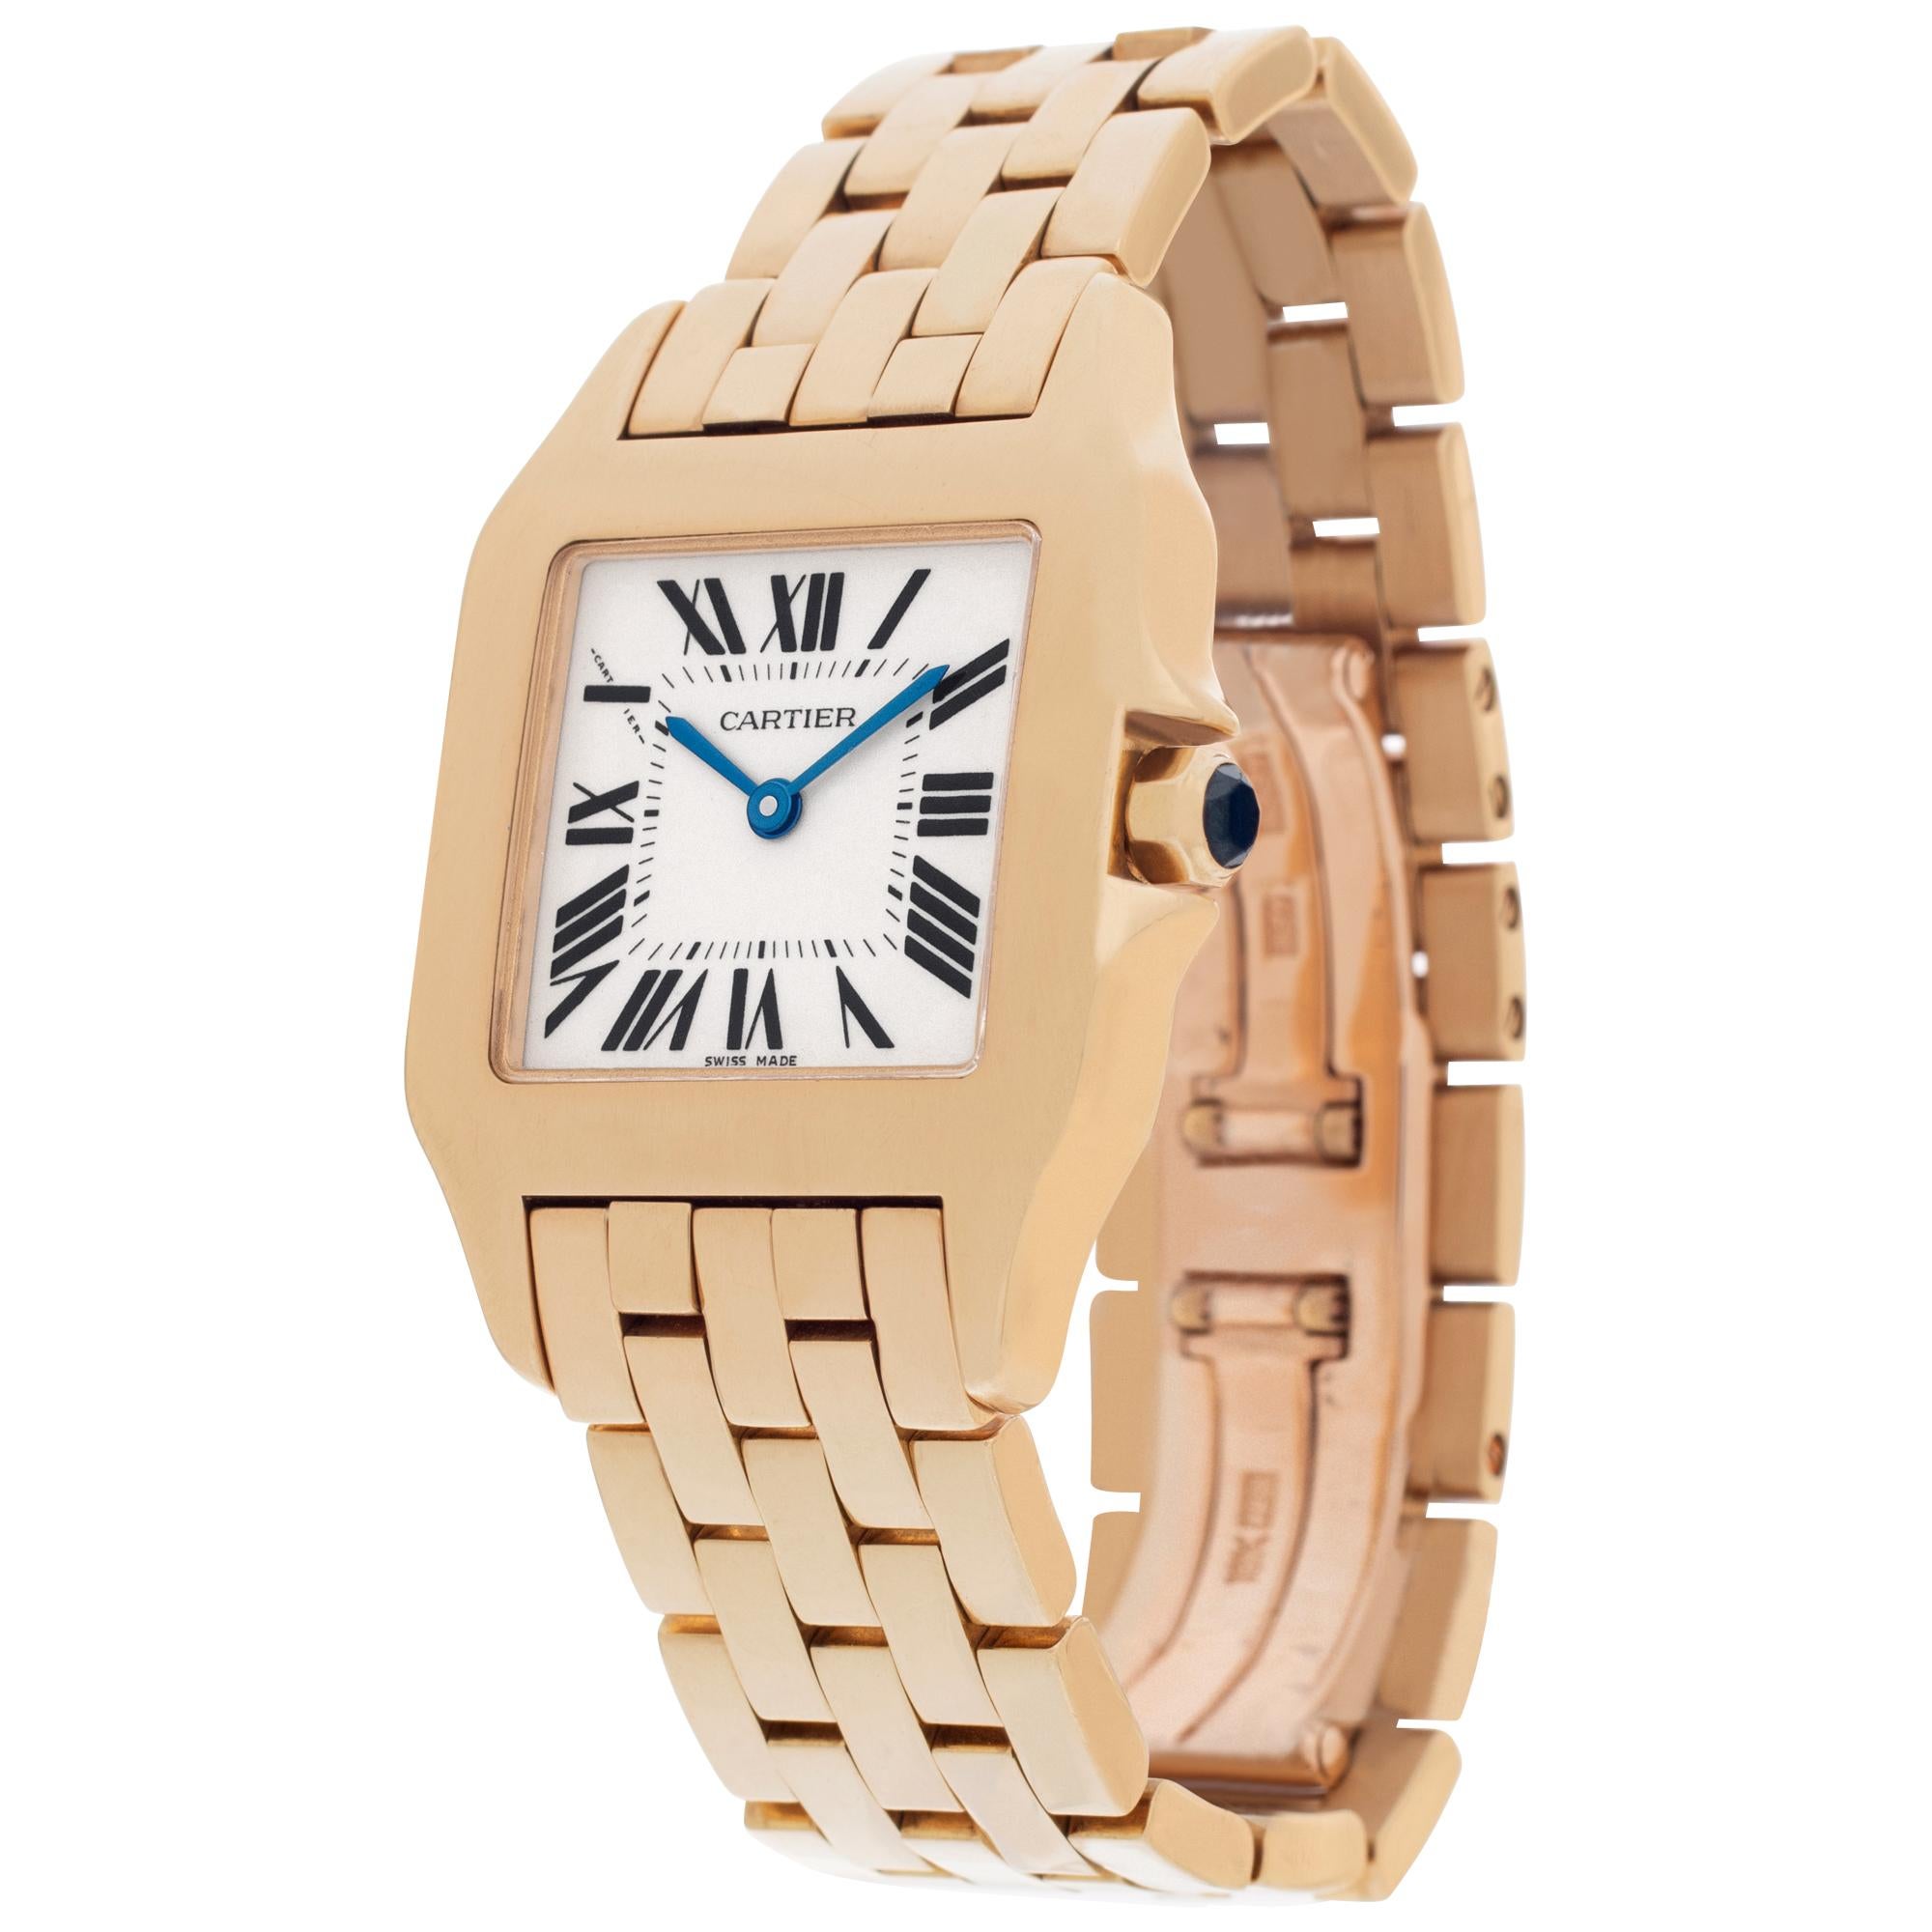 Cartier Mid-Size Demoiselle in 18k. Quartz. 25 mm case size. Fits 7.25 inches wrist. Ref W25062X9. With box & papers. Circa 2007. Fine Pre-owned Cartier Watch.

Certified preowned Classic Cartier Demoiselle W25062X9 watch is made out of yellow gold